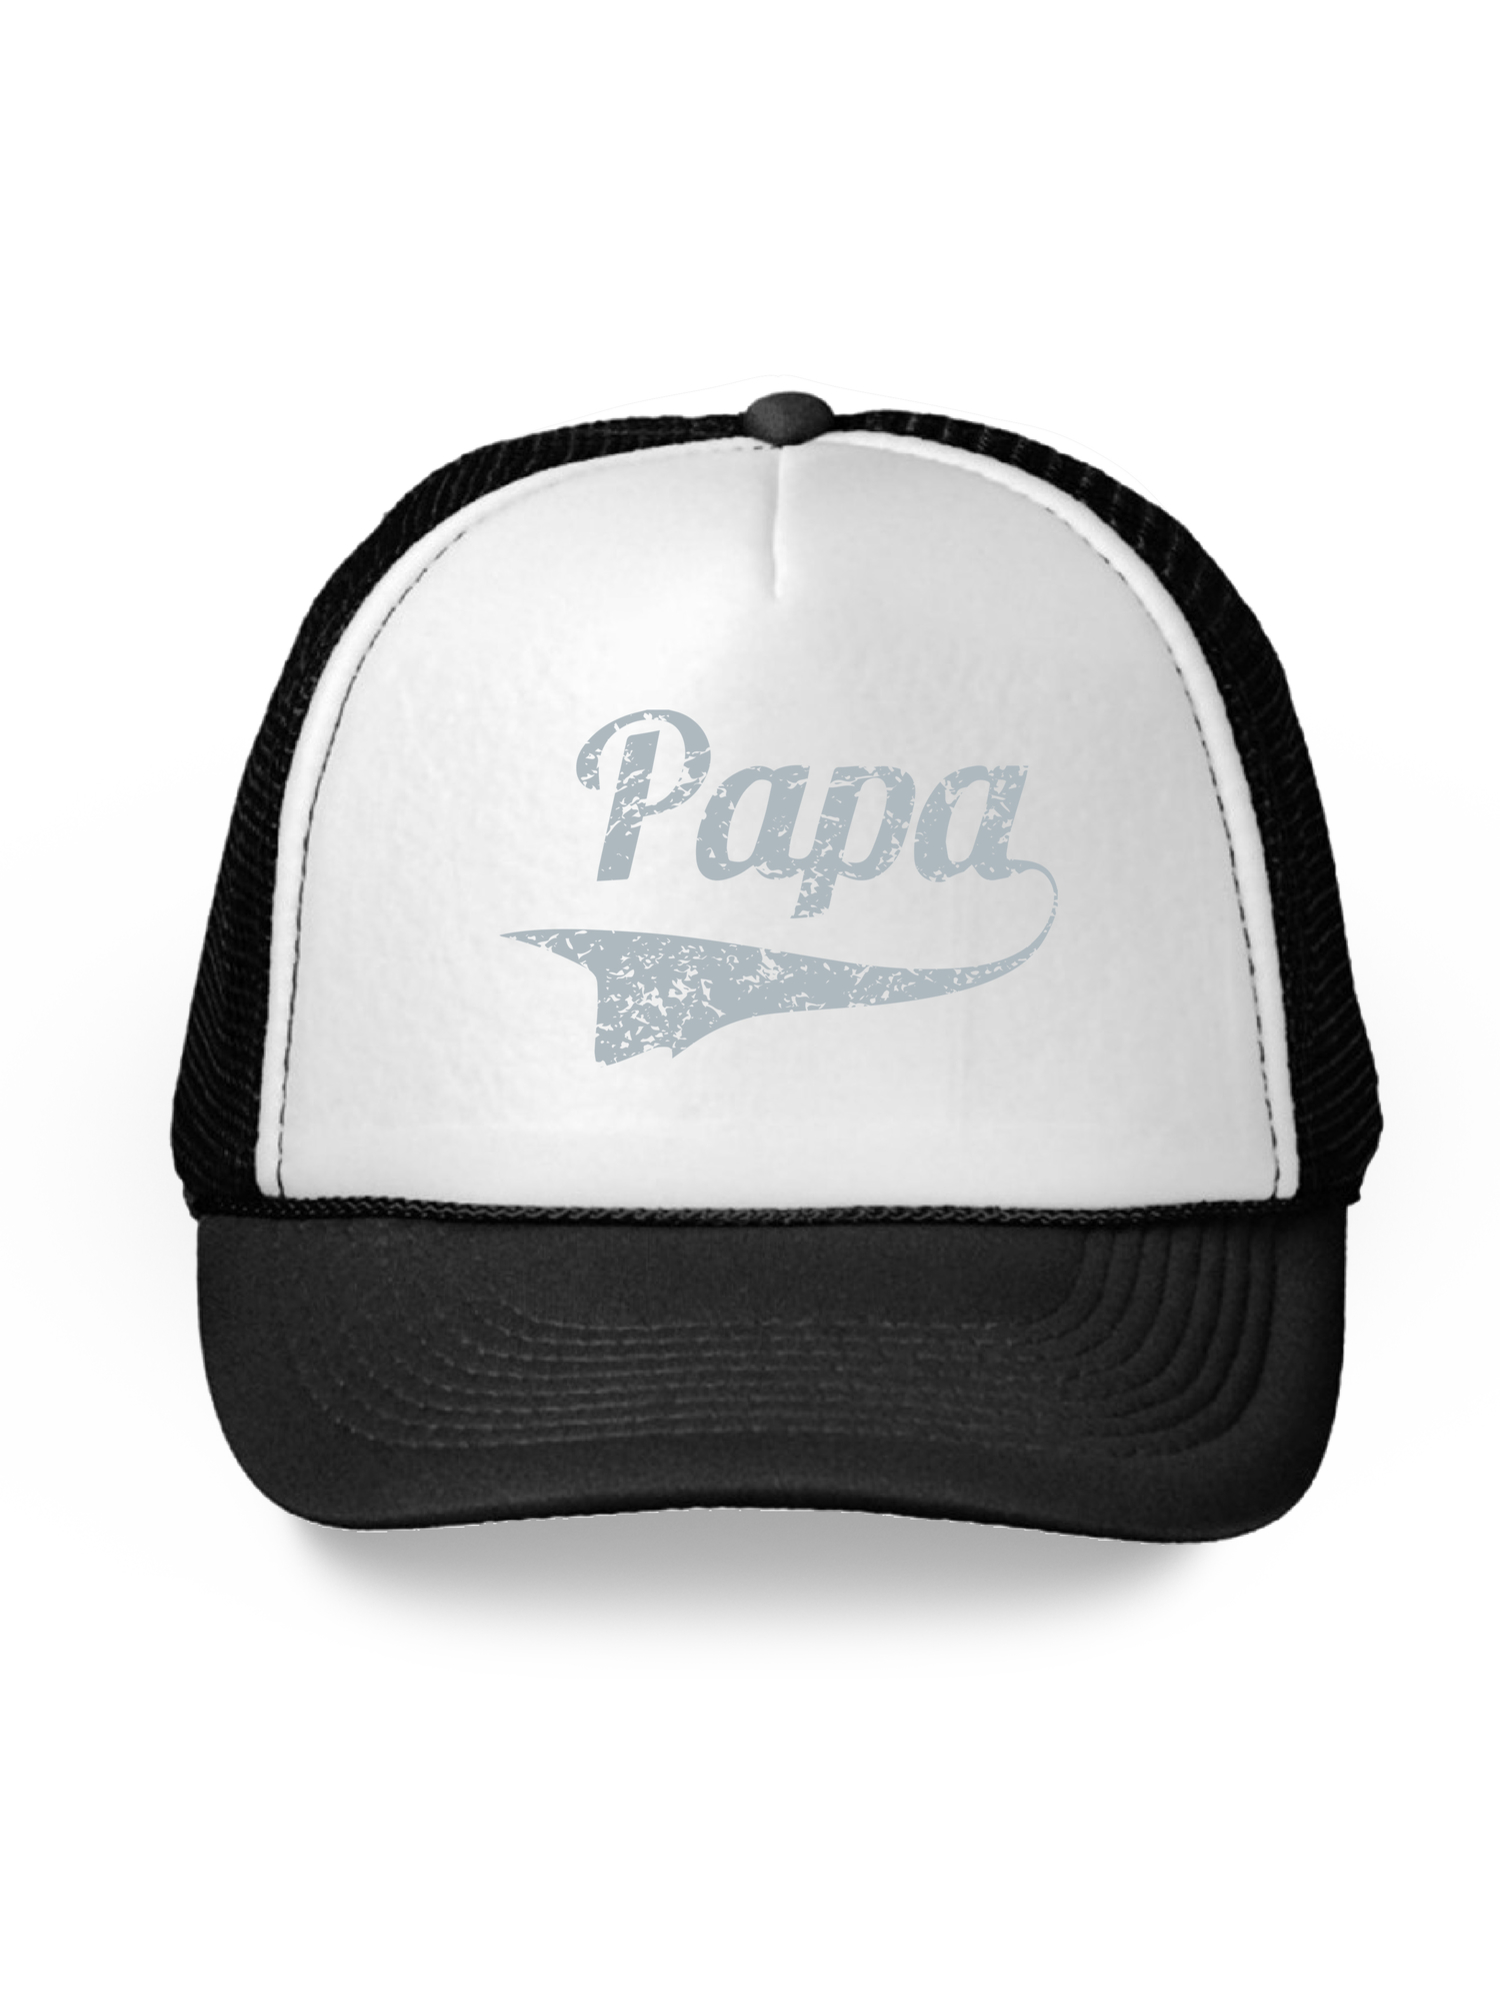 Awkward Styles Gifts for Dad Daddy Hat Father's Day Gifts for Men Dad Hats Dad 2018 Trucker Hat Funny Gifts for Dad Hat Accessories for Men Father Trucker Hat Daddy 2018 Snapback Hat Dad Hats - image 1 of 6